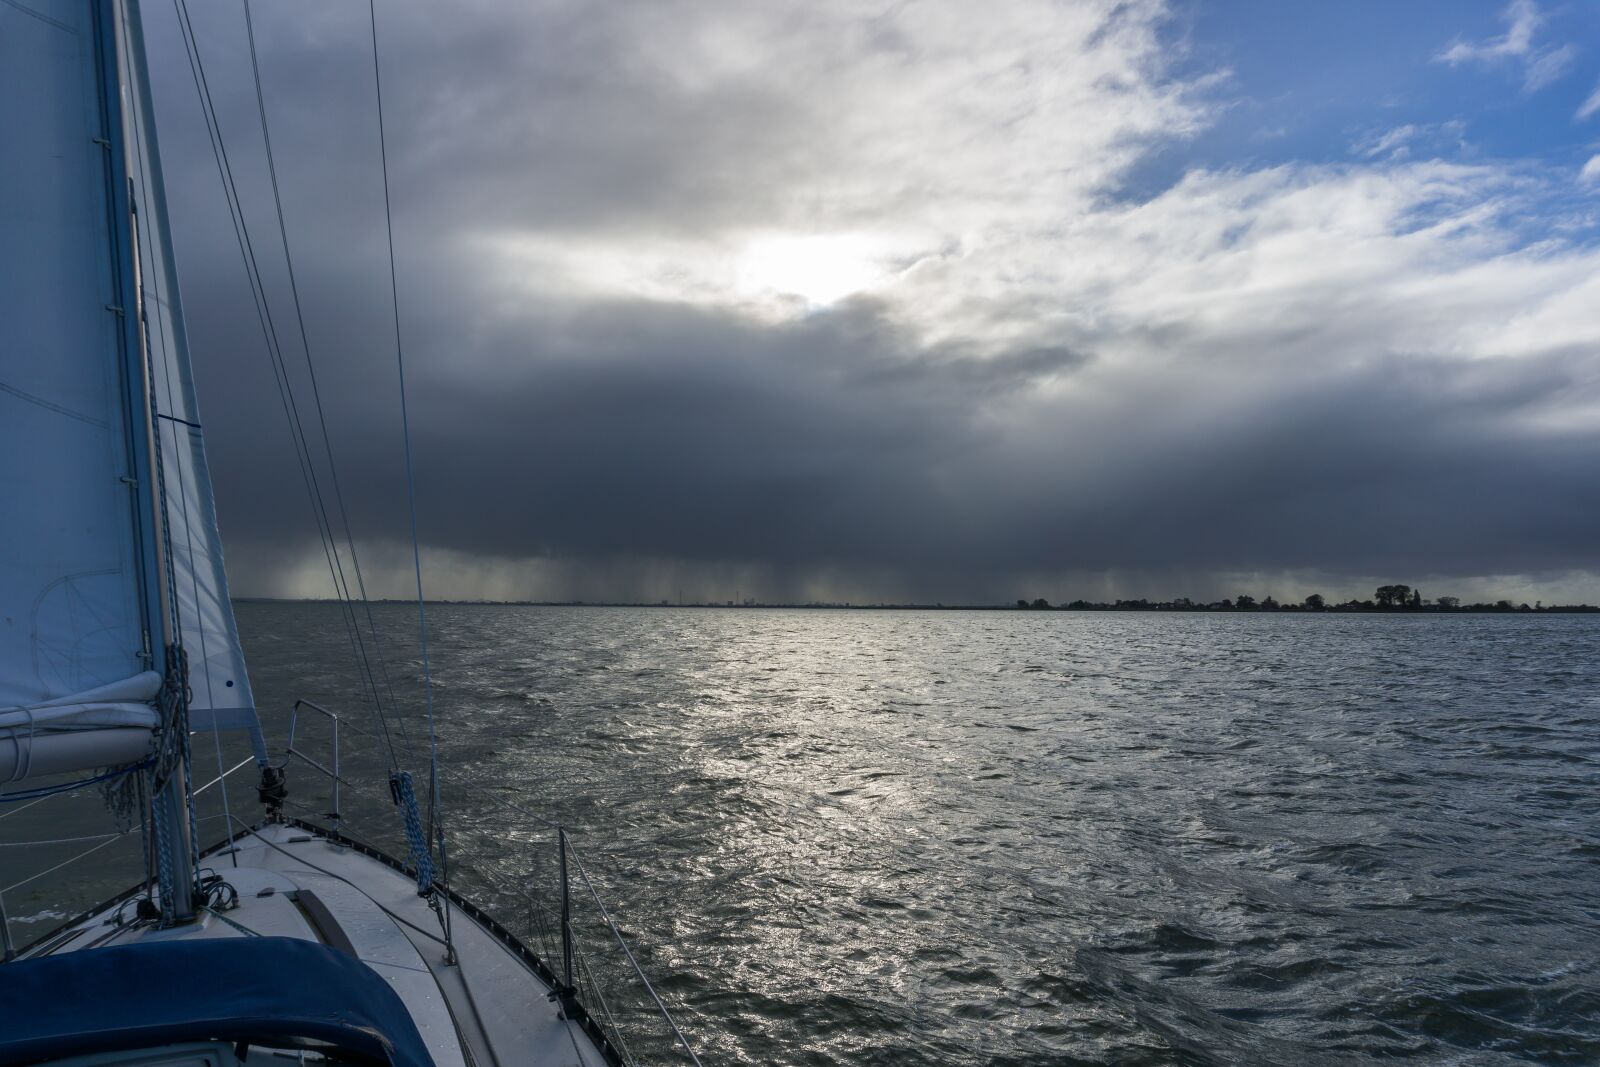 Sony a6000 sample photo. Sailing boat, clouds, air photography